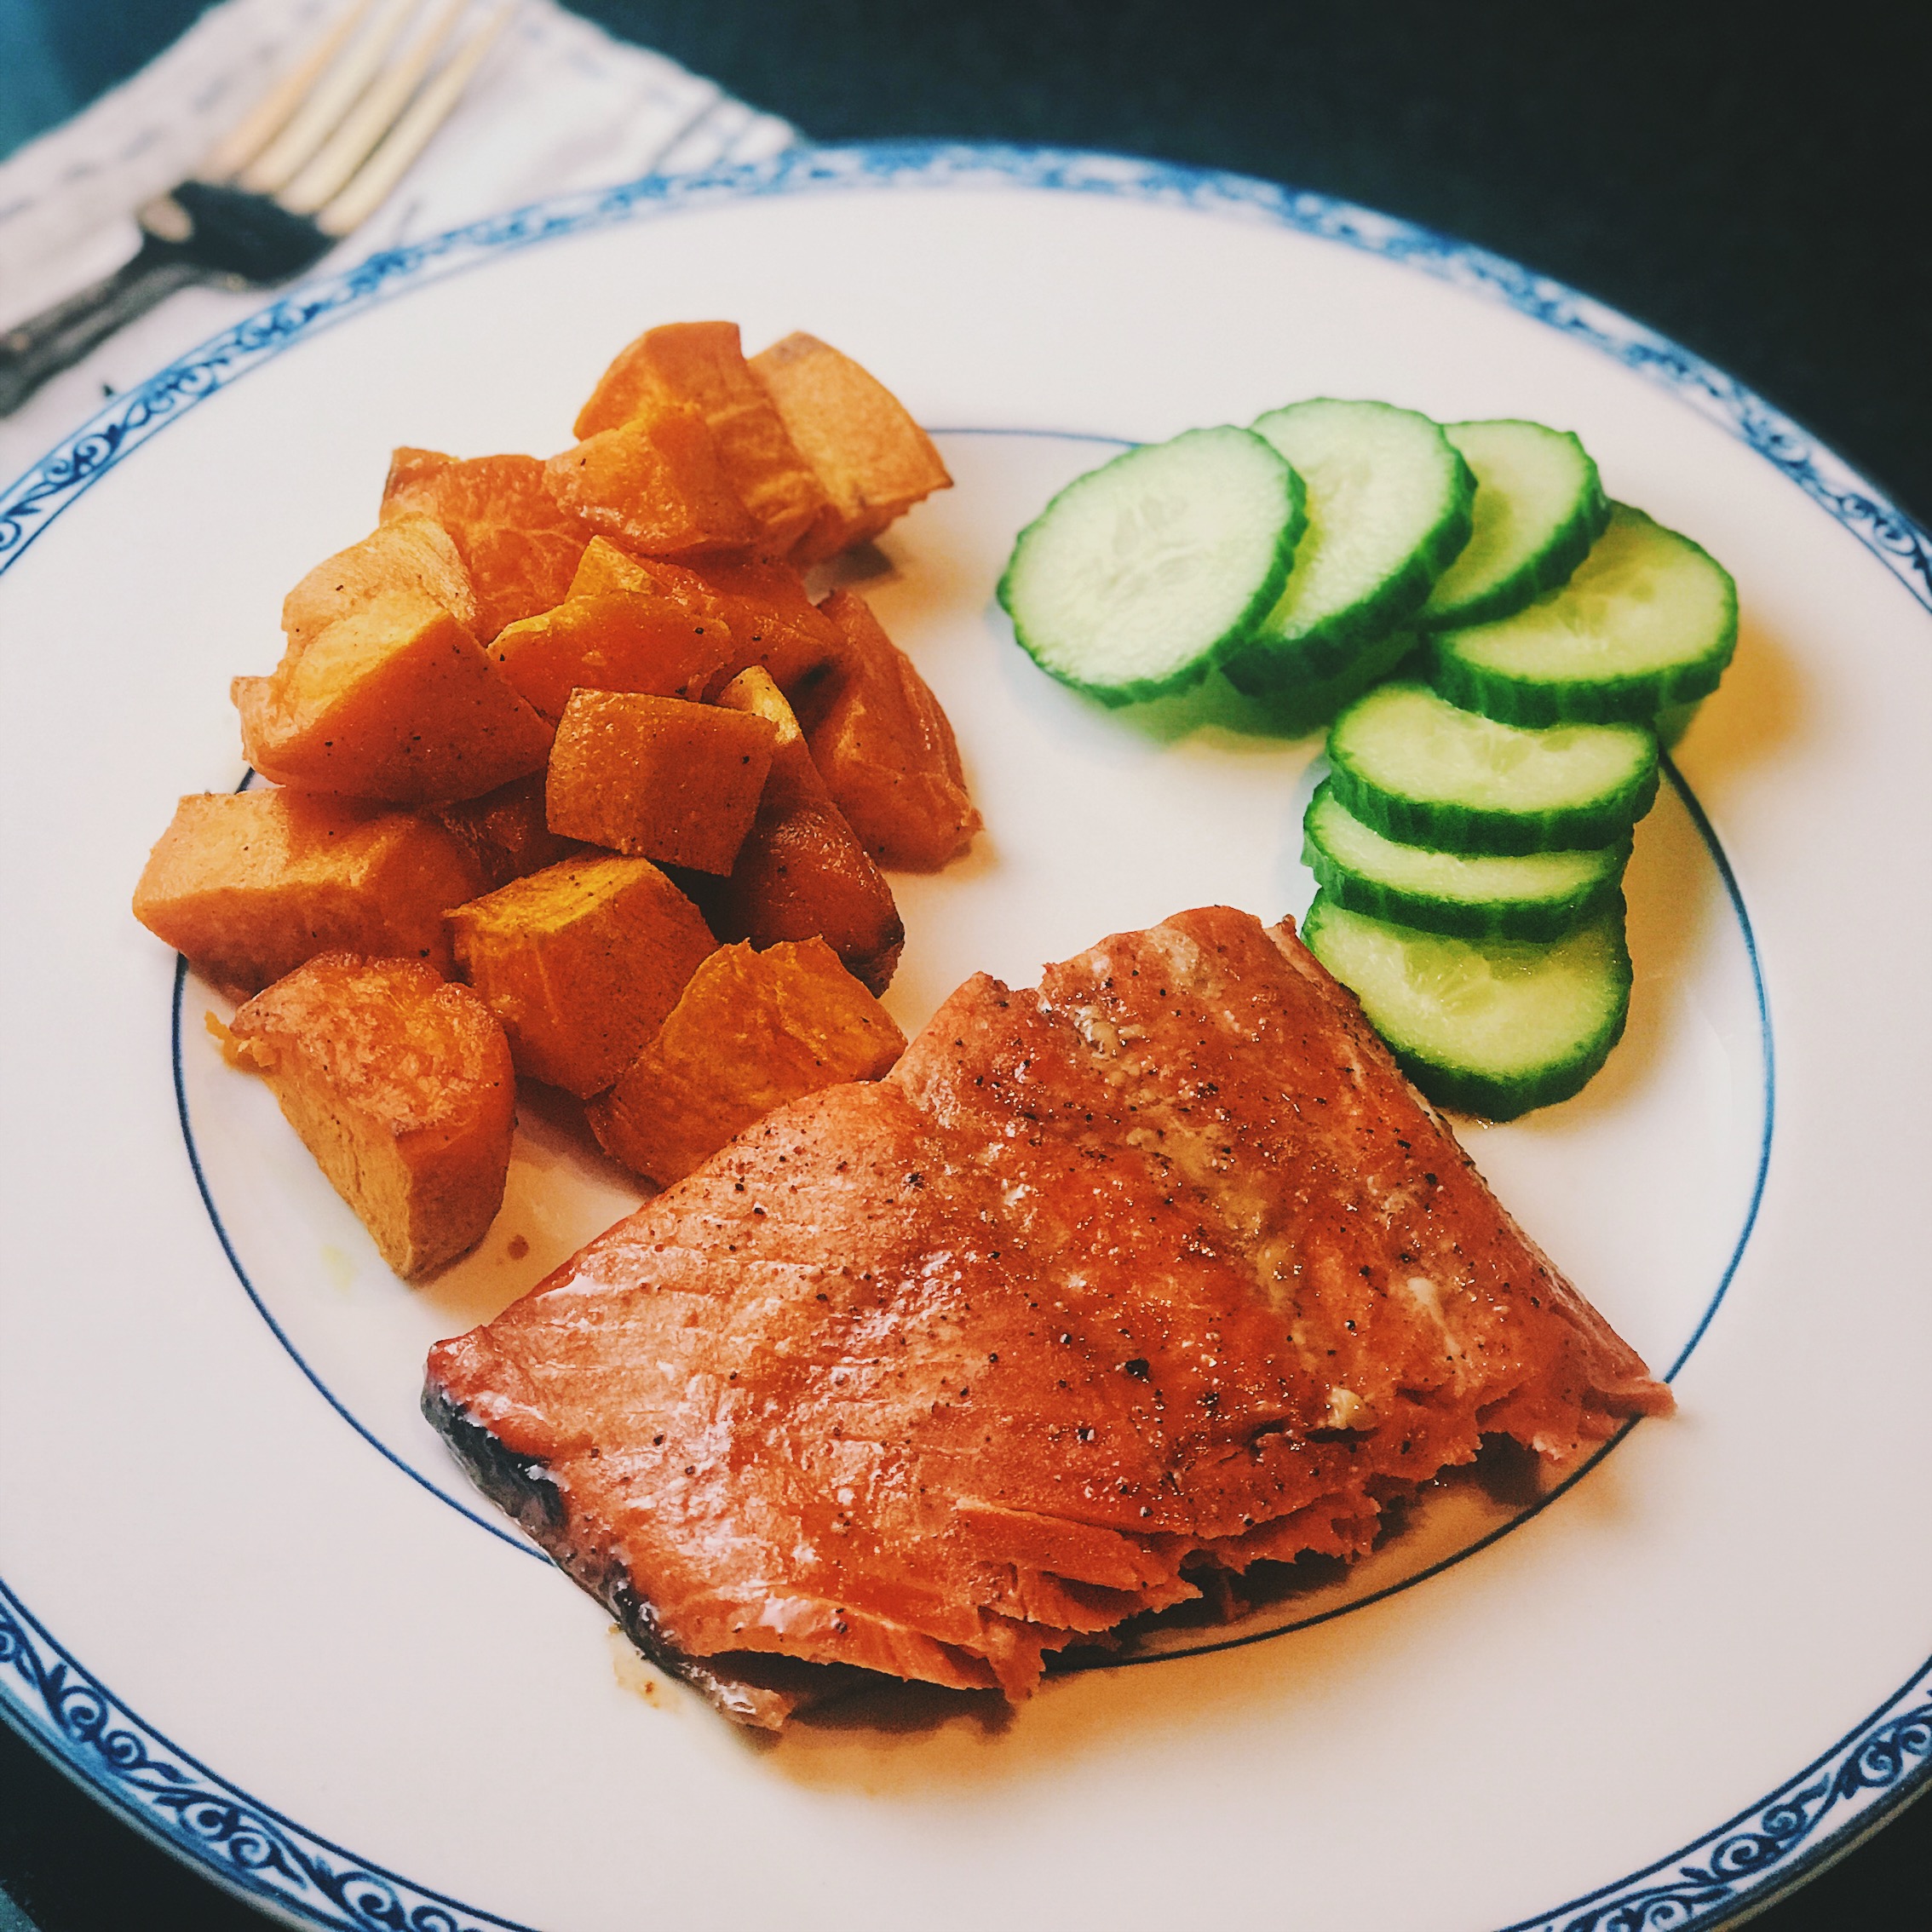 healthy eating during pregnancy salmon omega 3s cucumbers sweet potato